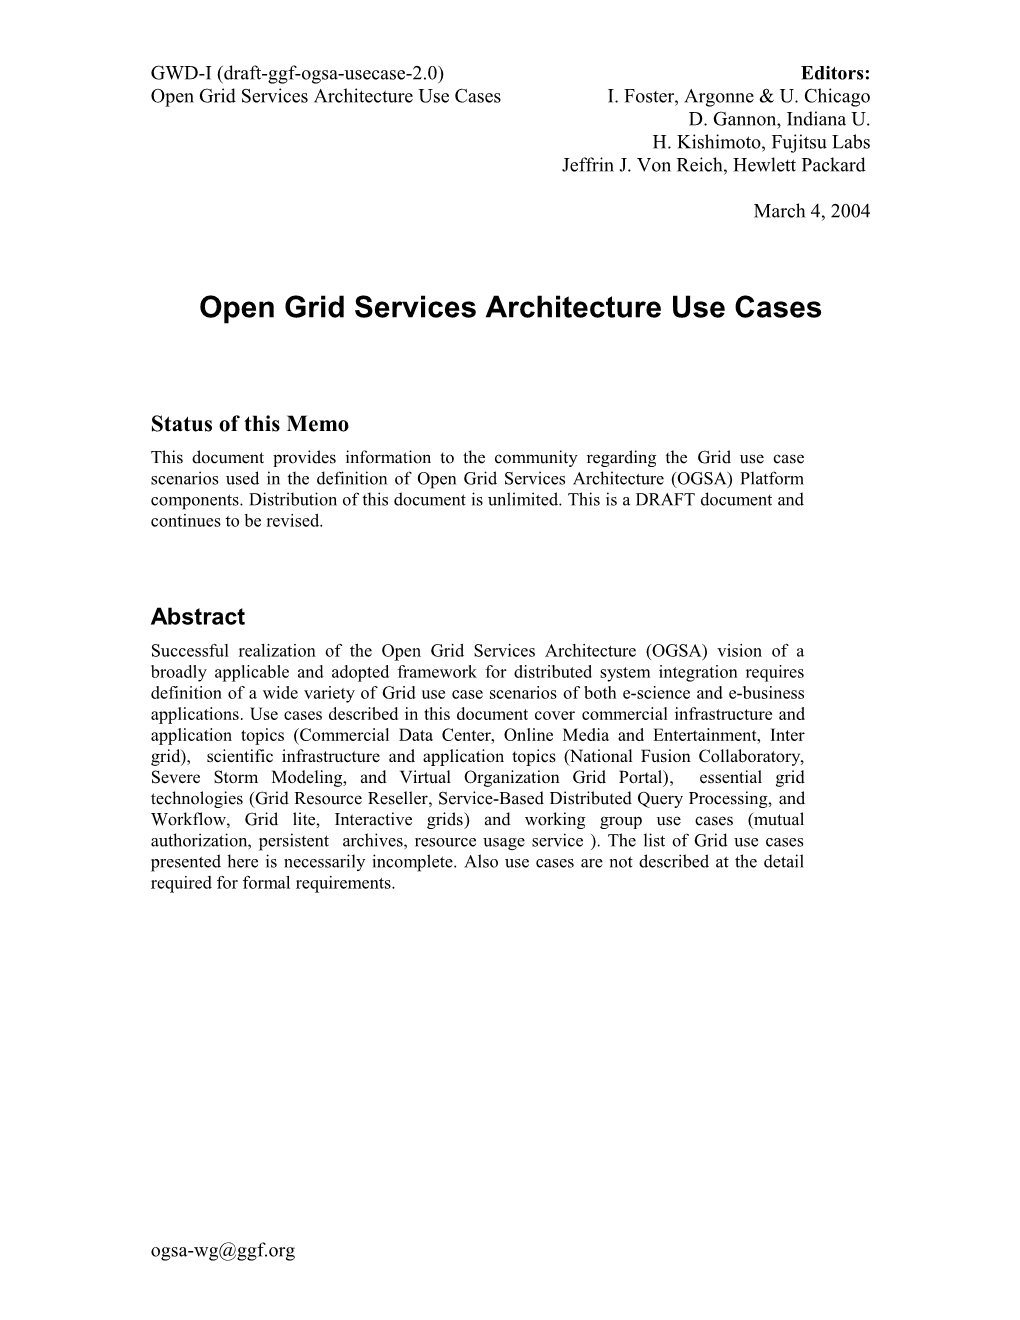 Open Grid Services Architecture Usecase